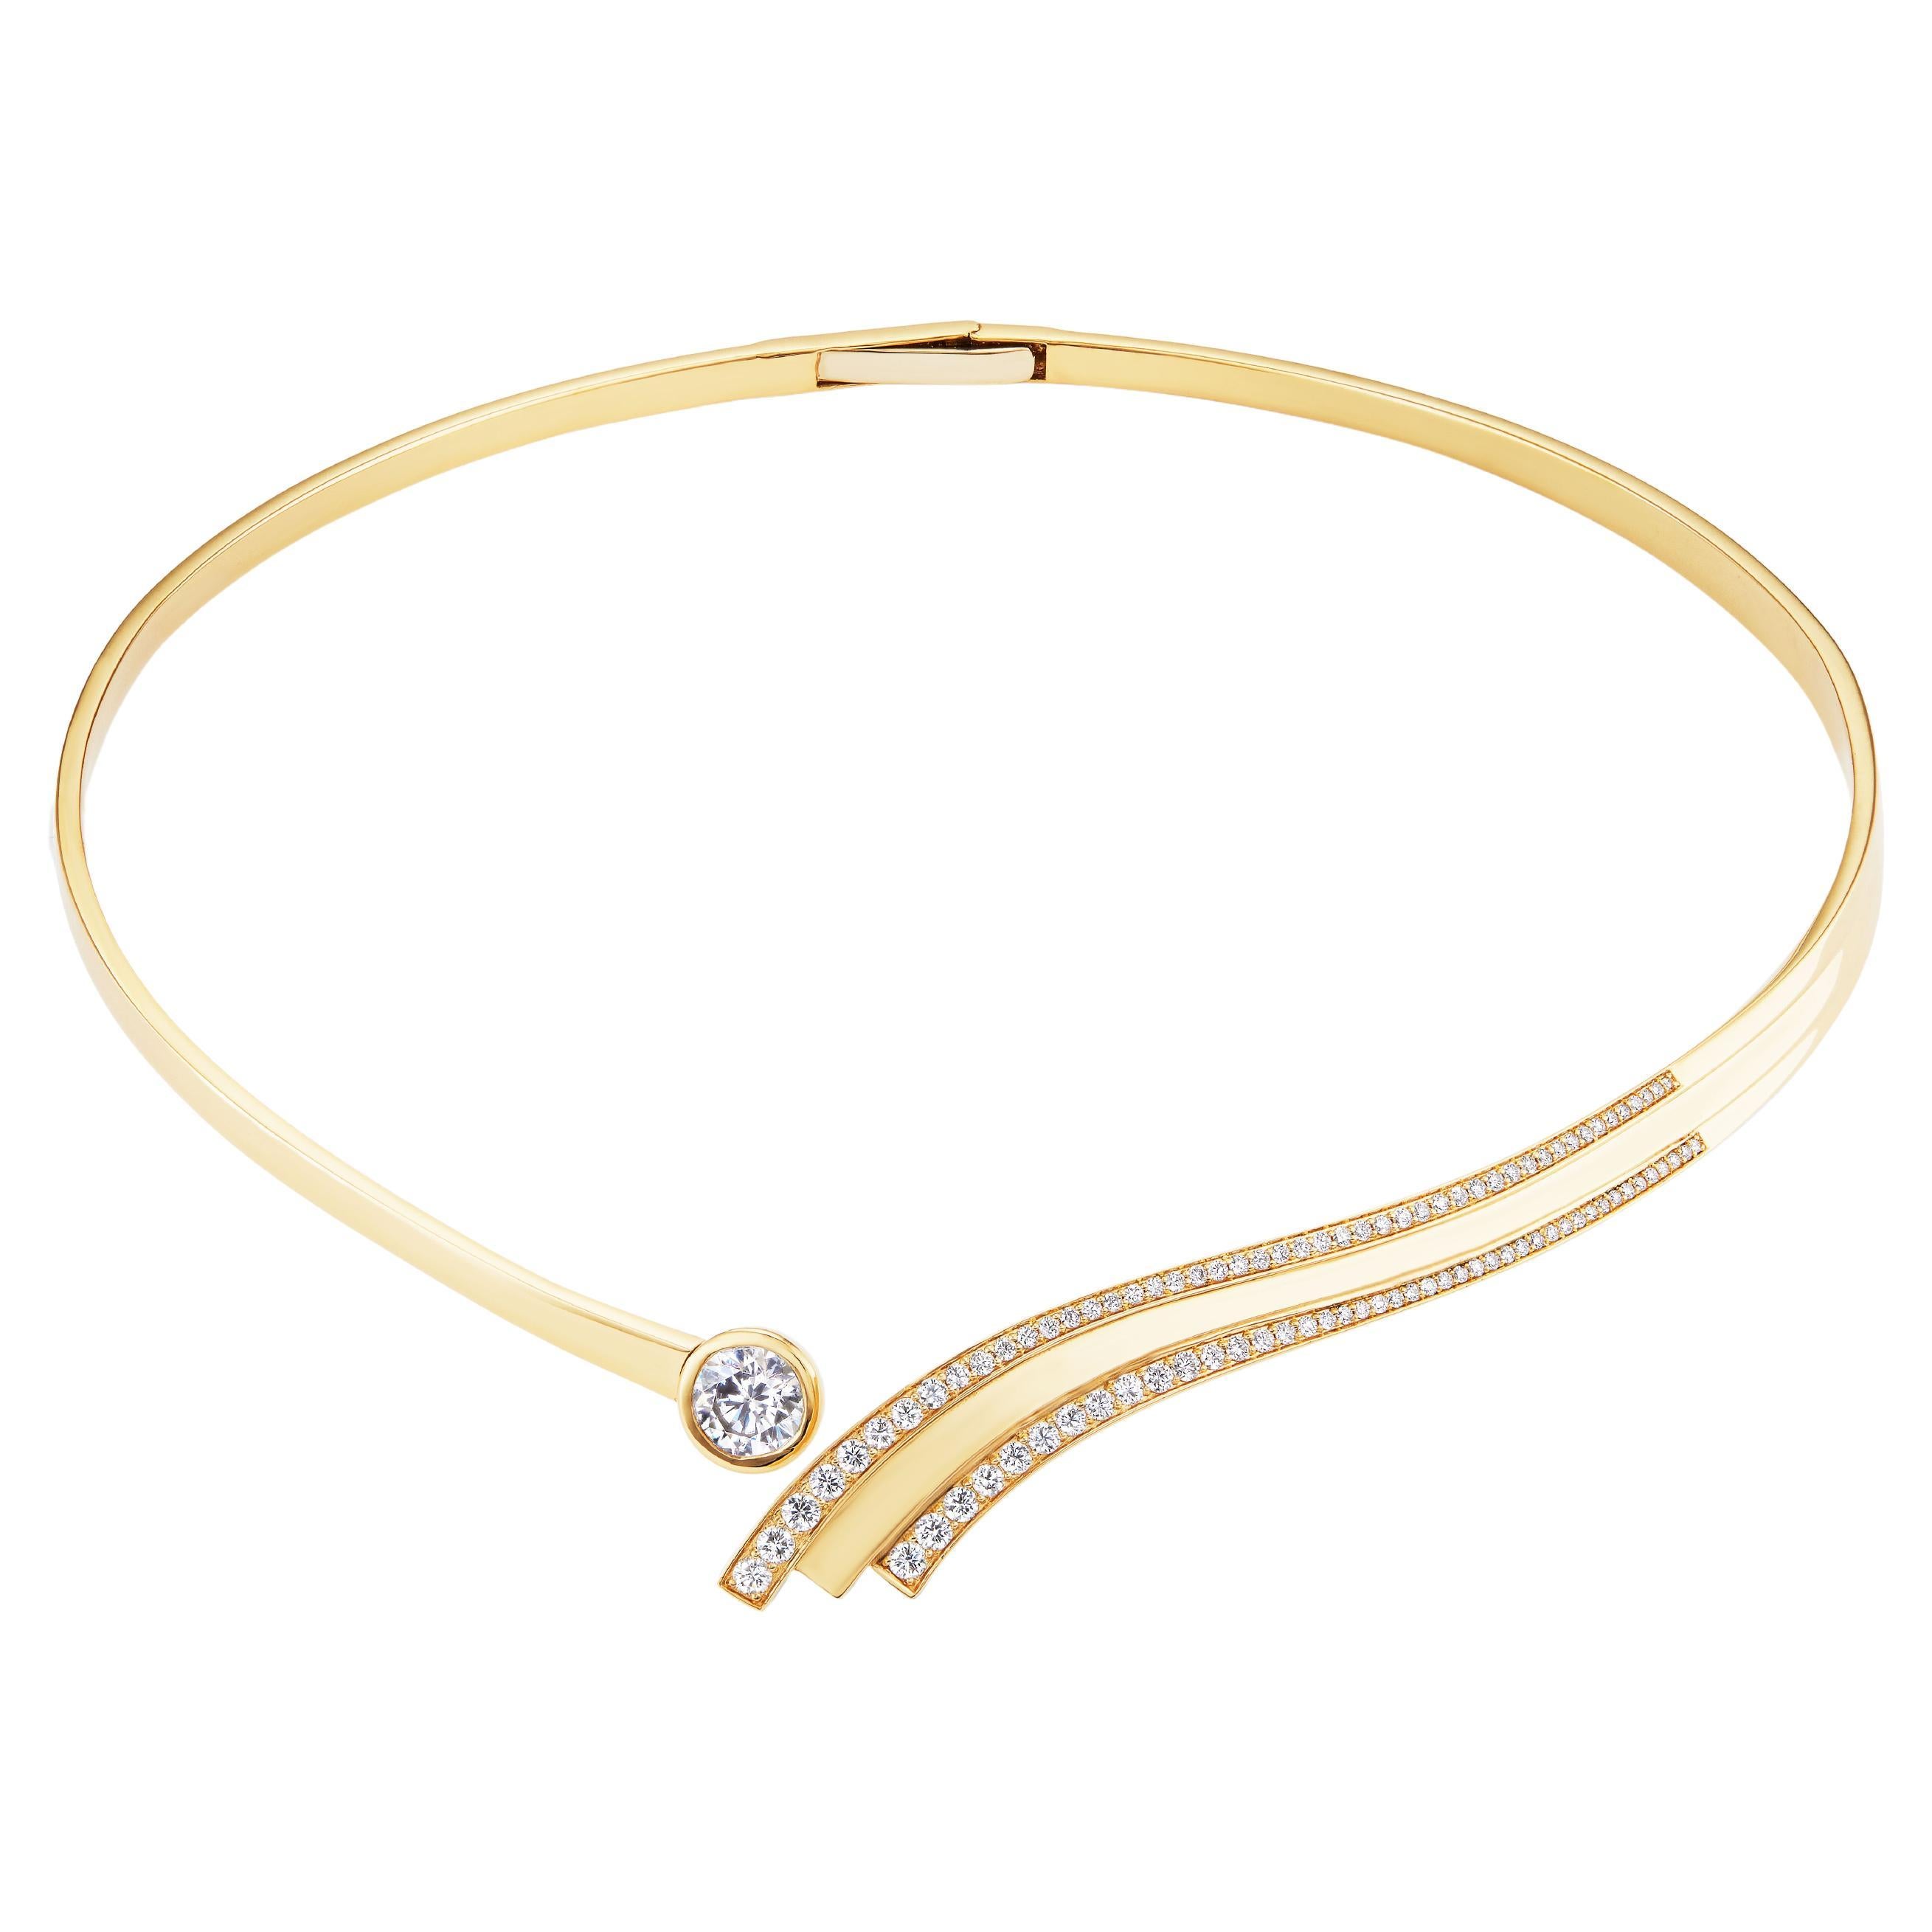 Casey Perez Sculptural 18k gold diamond choker with curving detail  For Sale